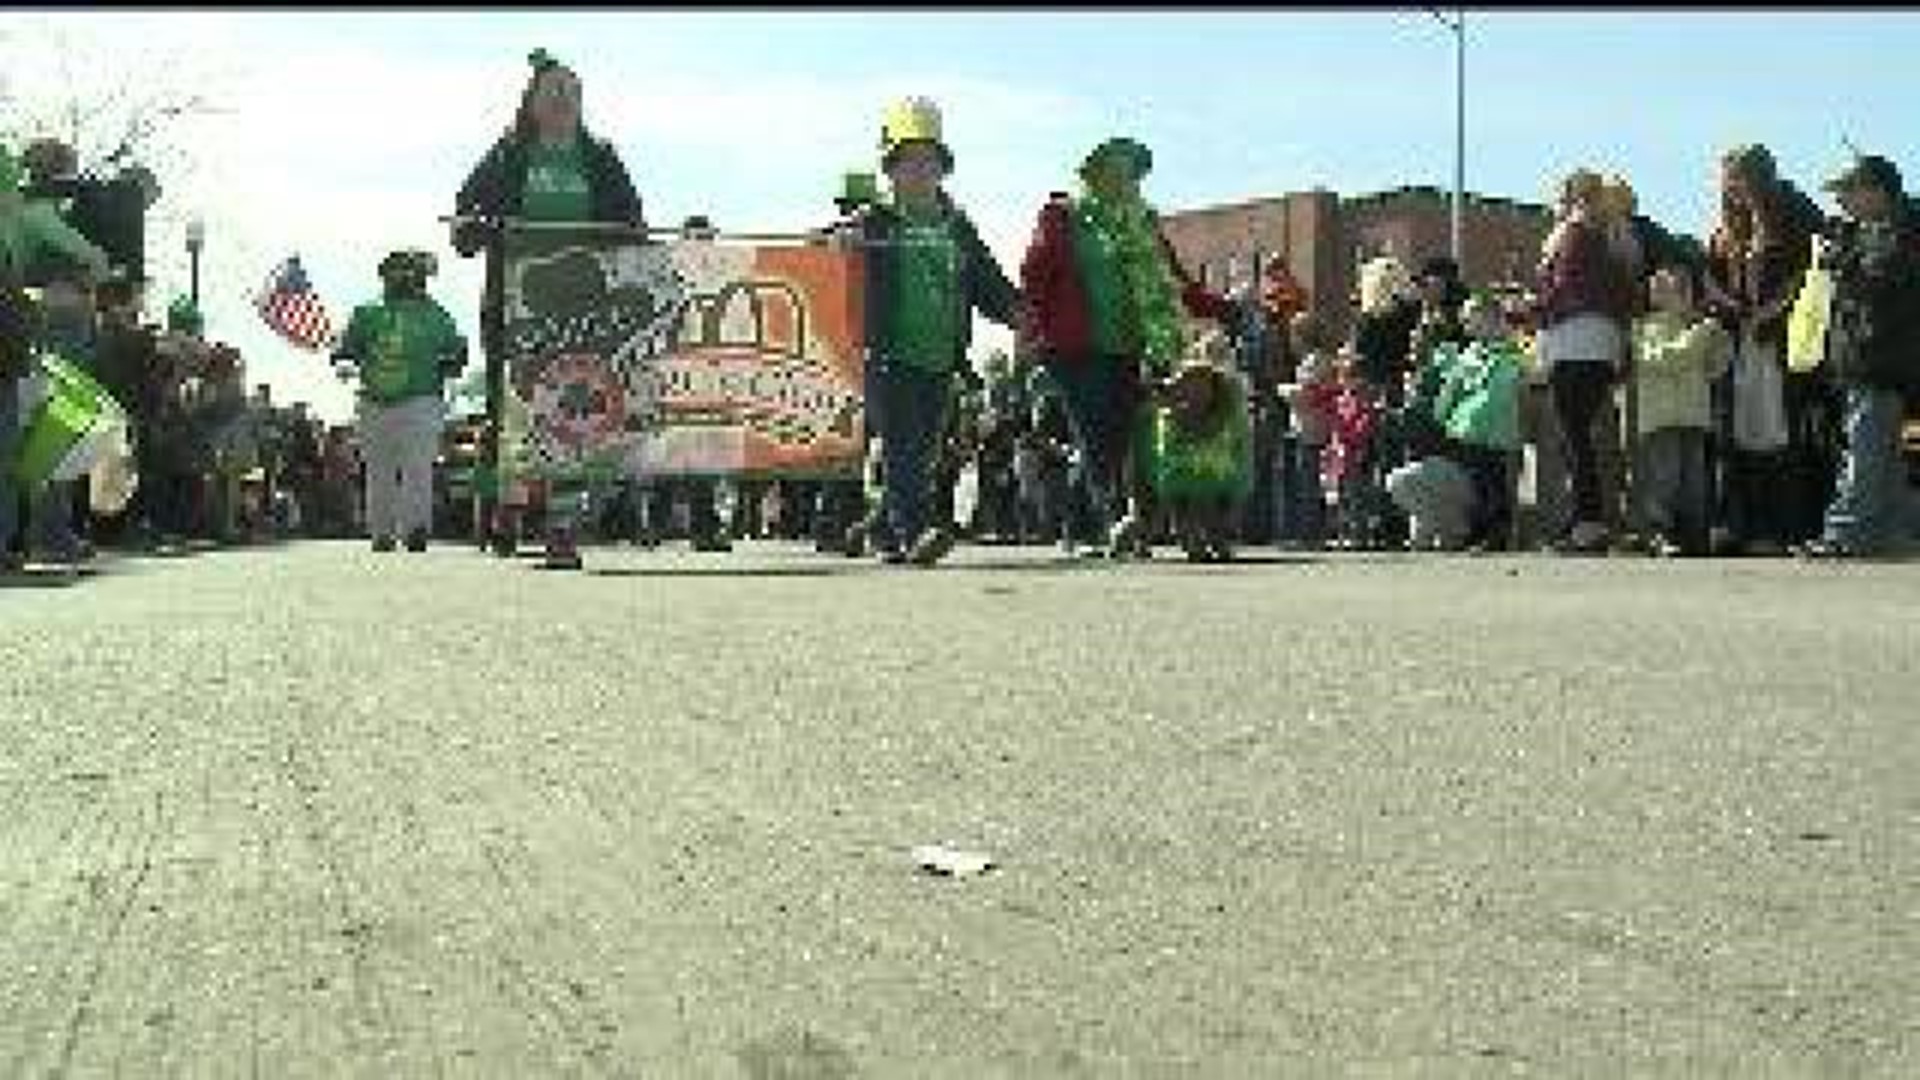 St Patrick's Day Marked by Runners and Marchers